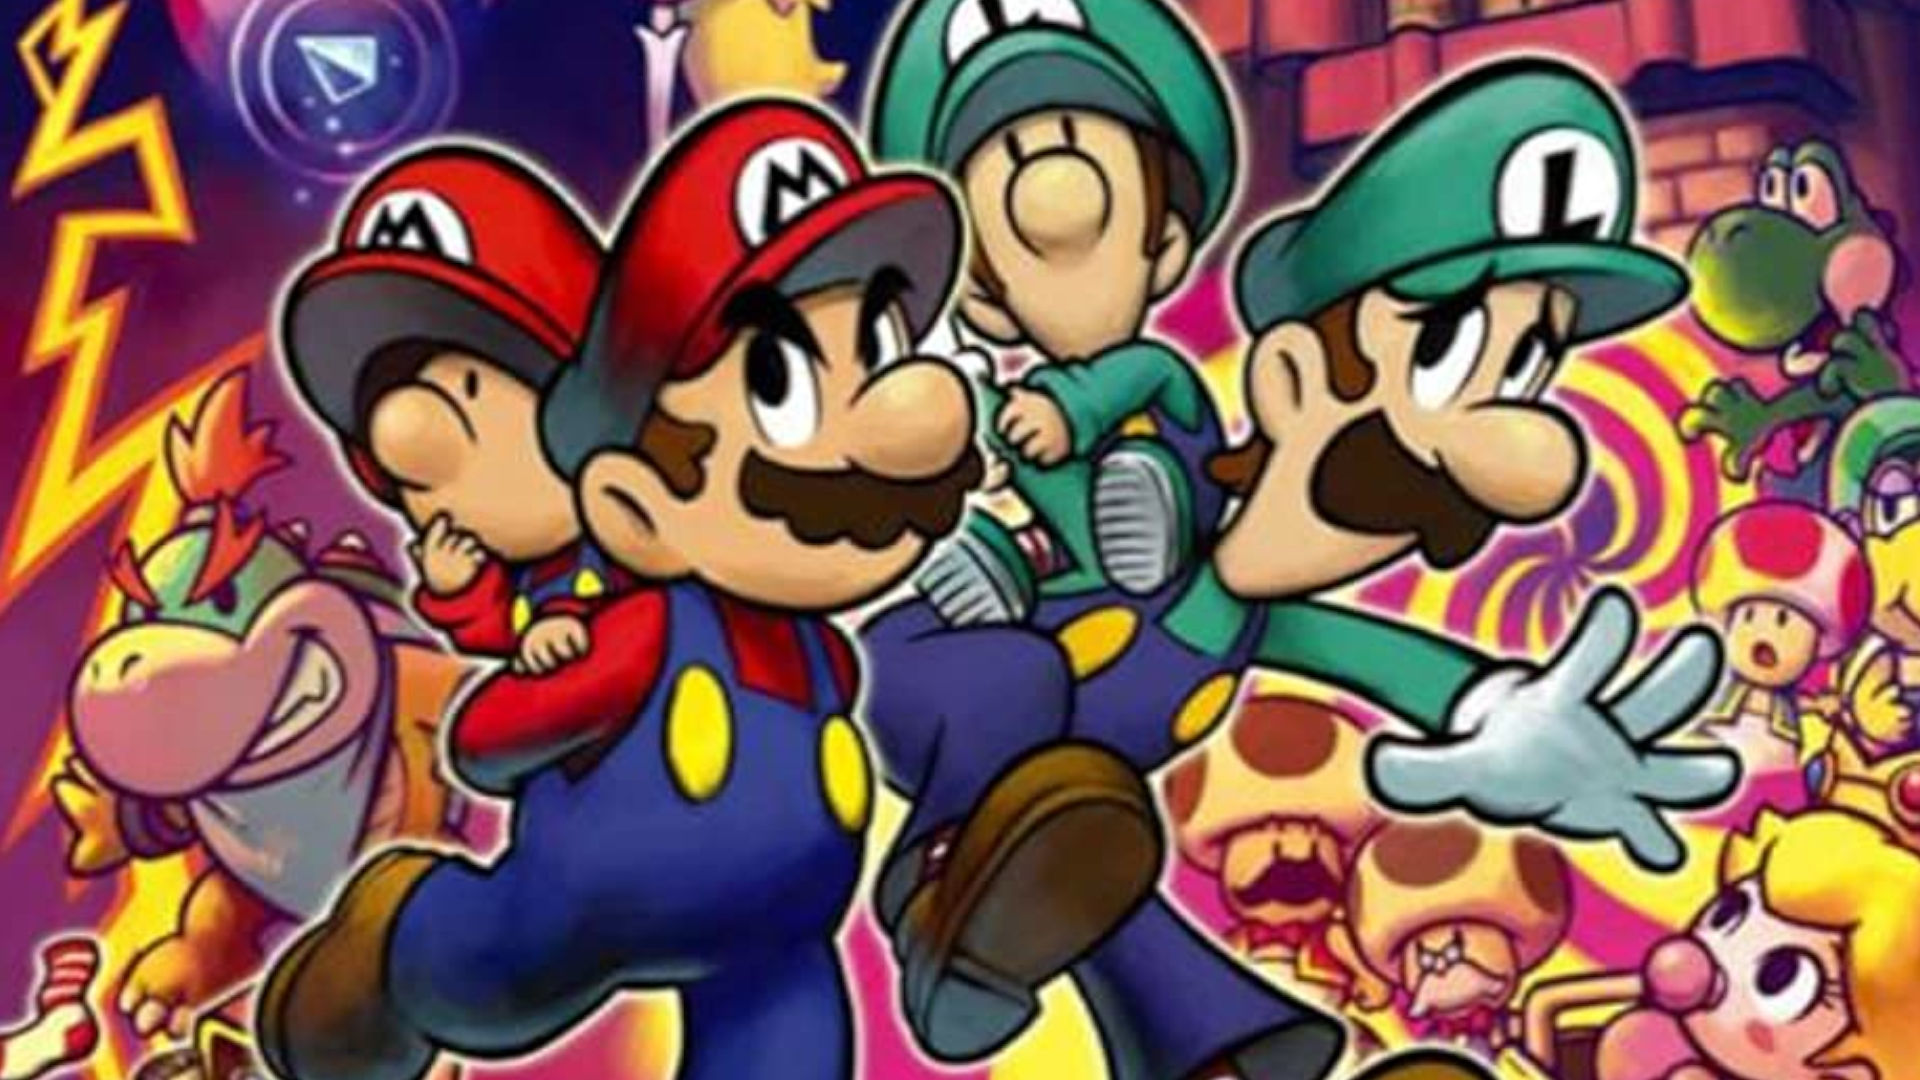 Reddit asks which Mario and Luigi game rules the roost